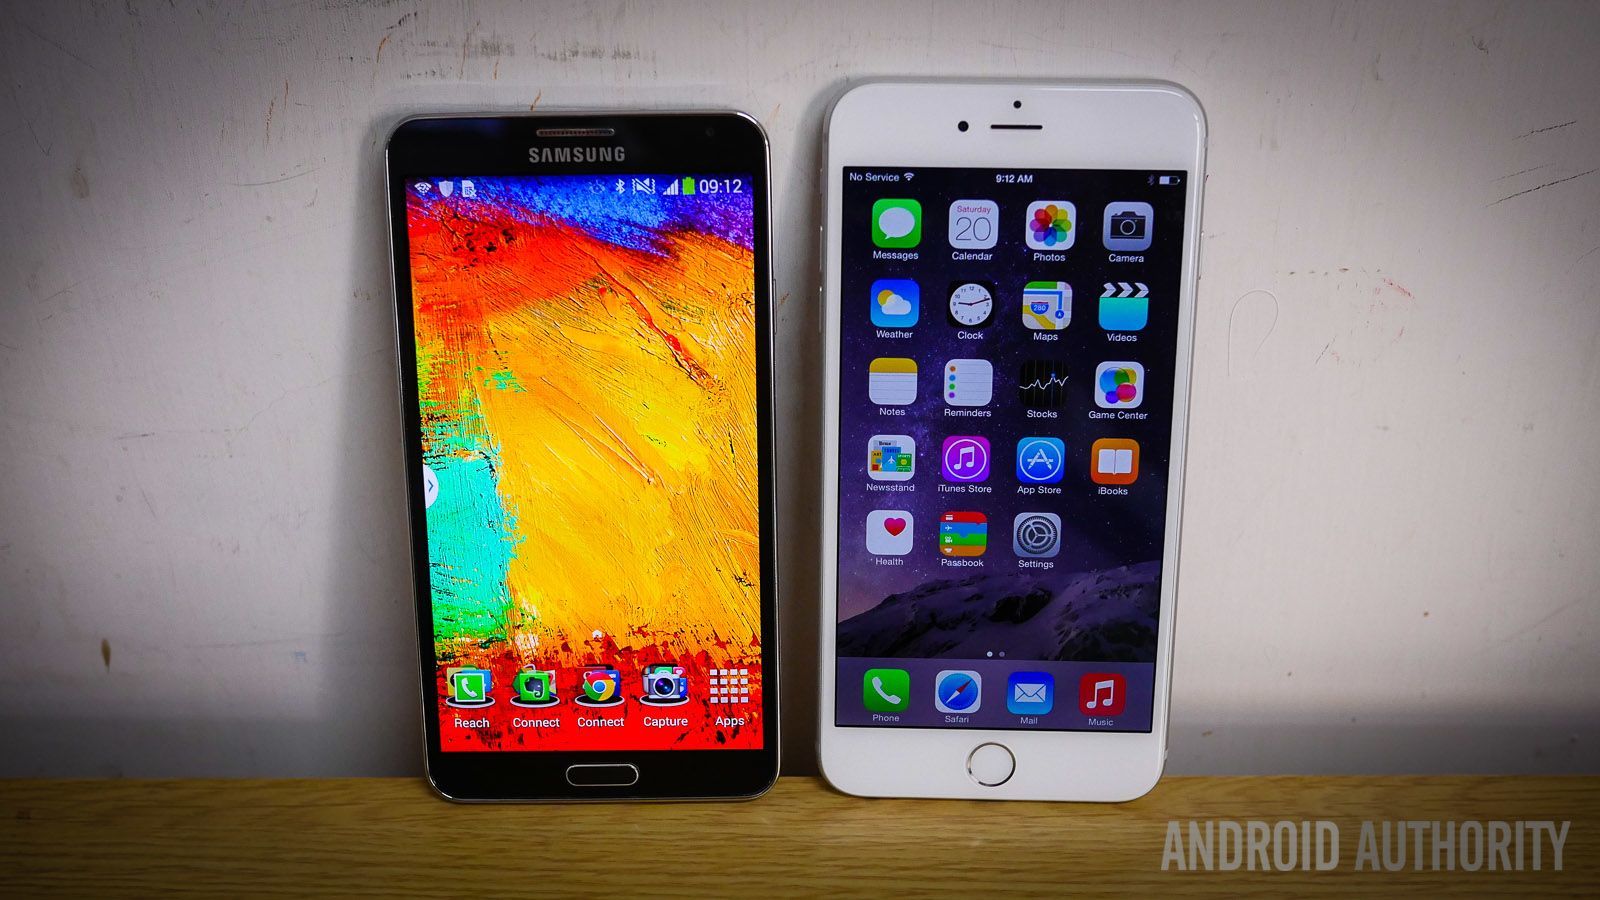 iphone 6 plus vs samsung galaxy note 3 quick look aa (1 of 20)